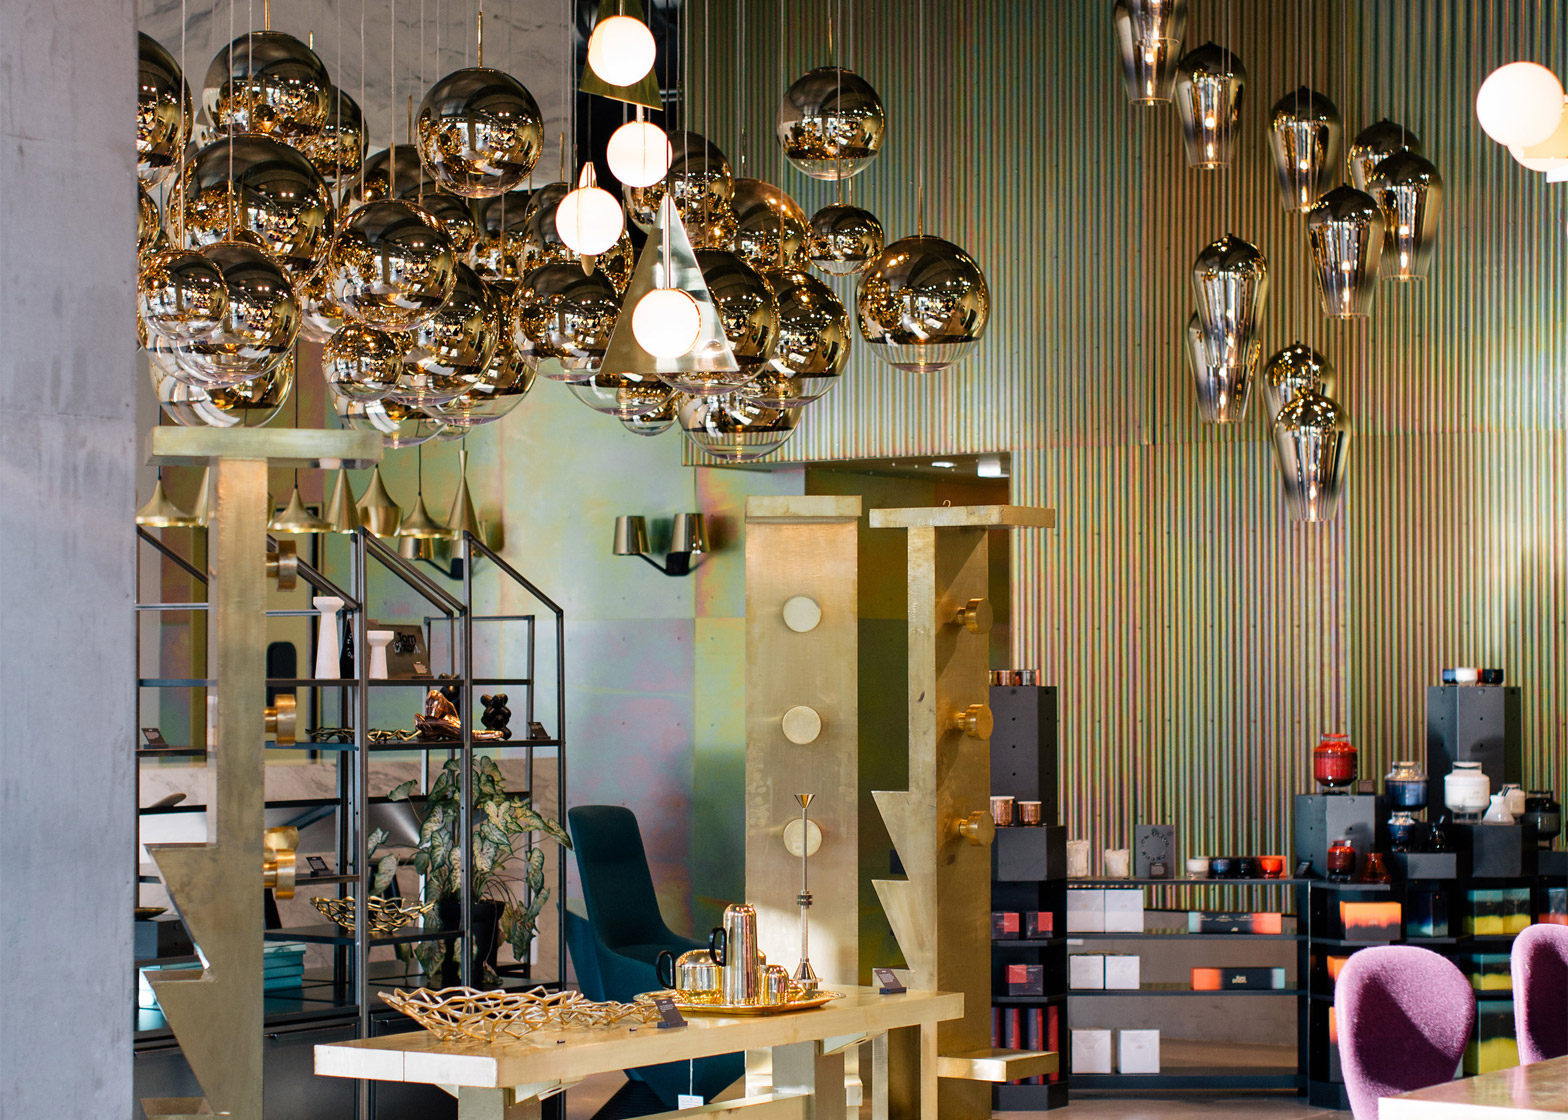 Tom Dixon collaborates with open his first store in LA